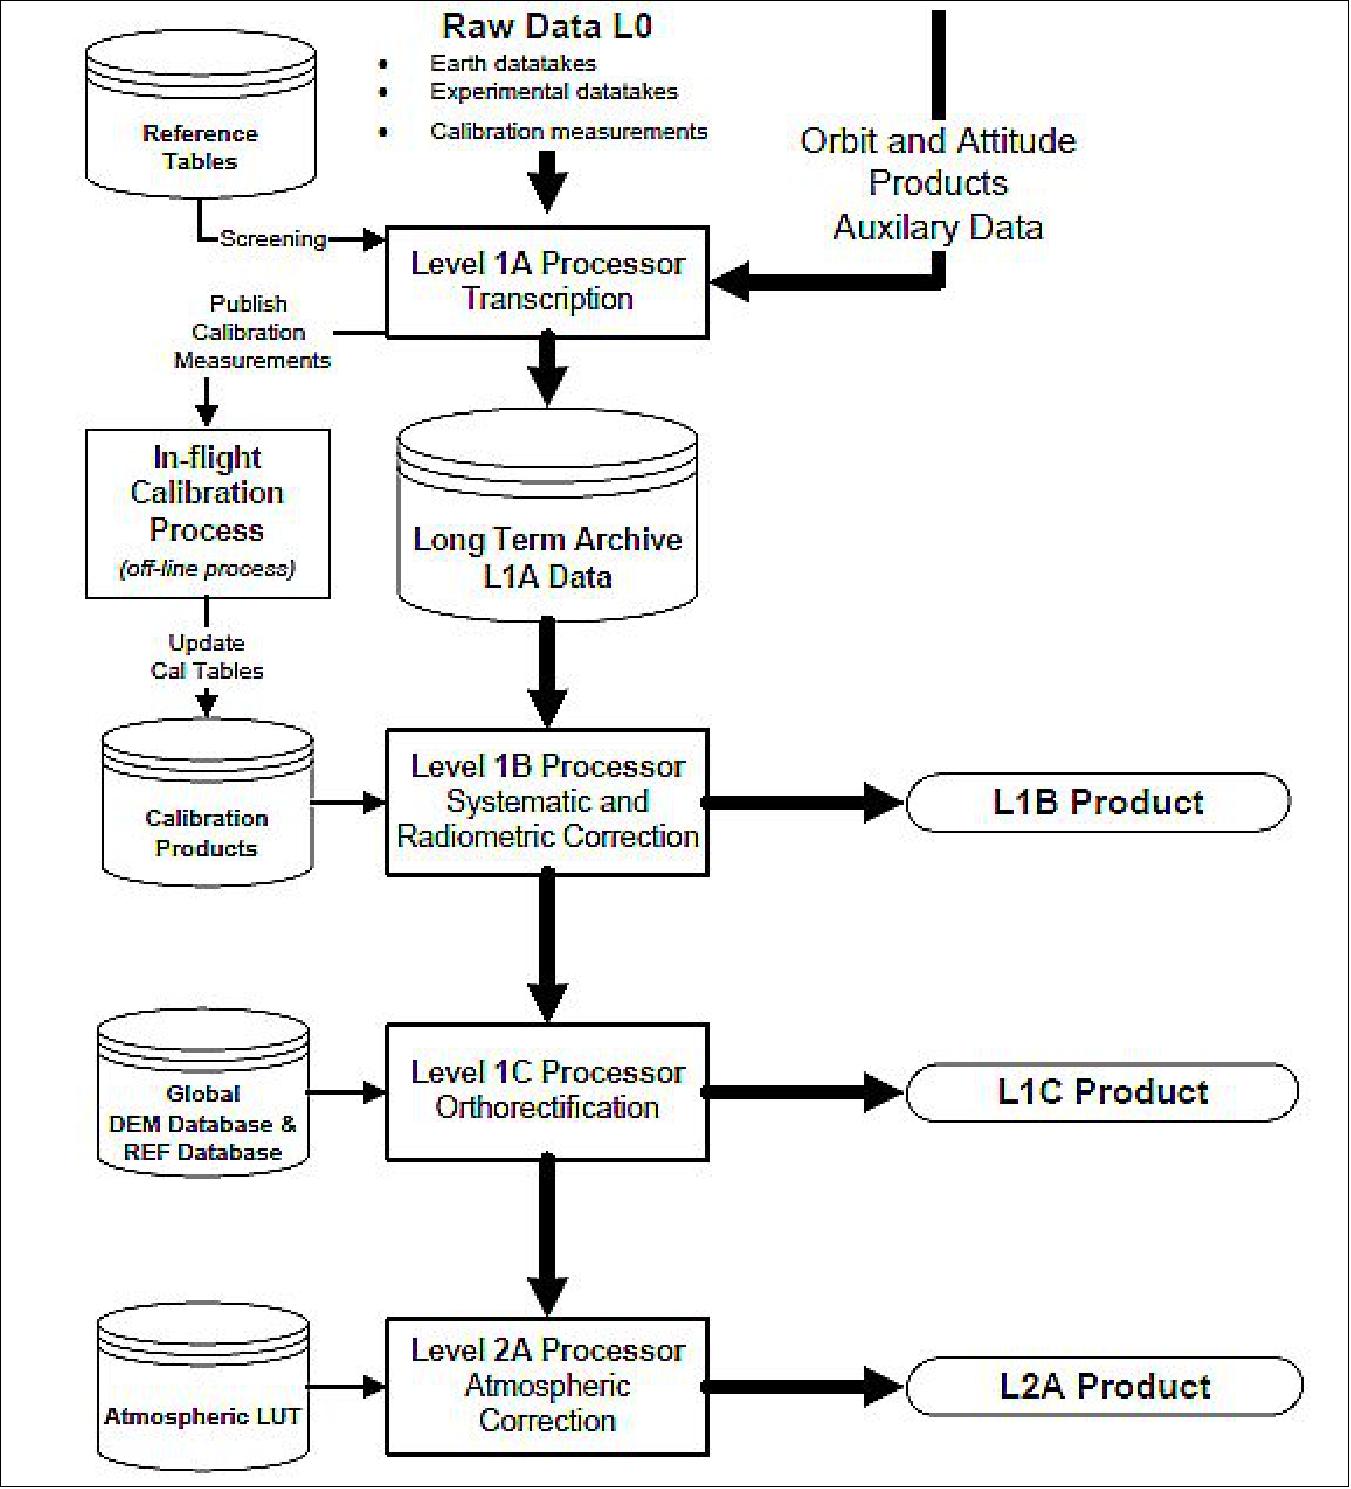 Figure 26: Processing chain and product generation (image credit: DLR)